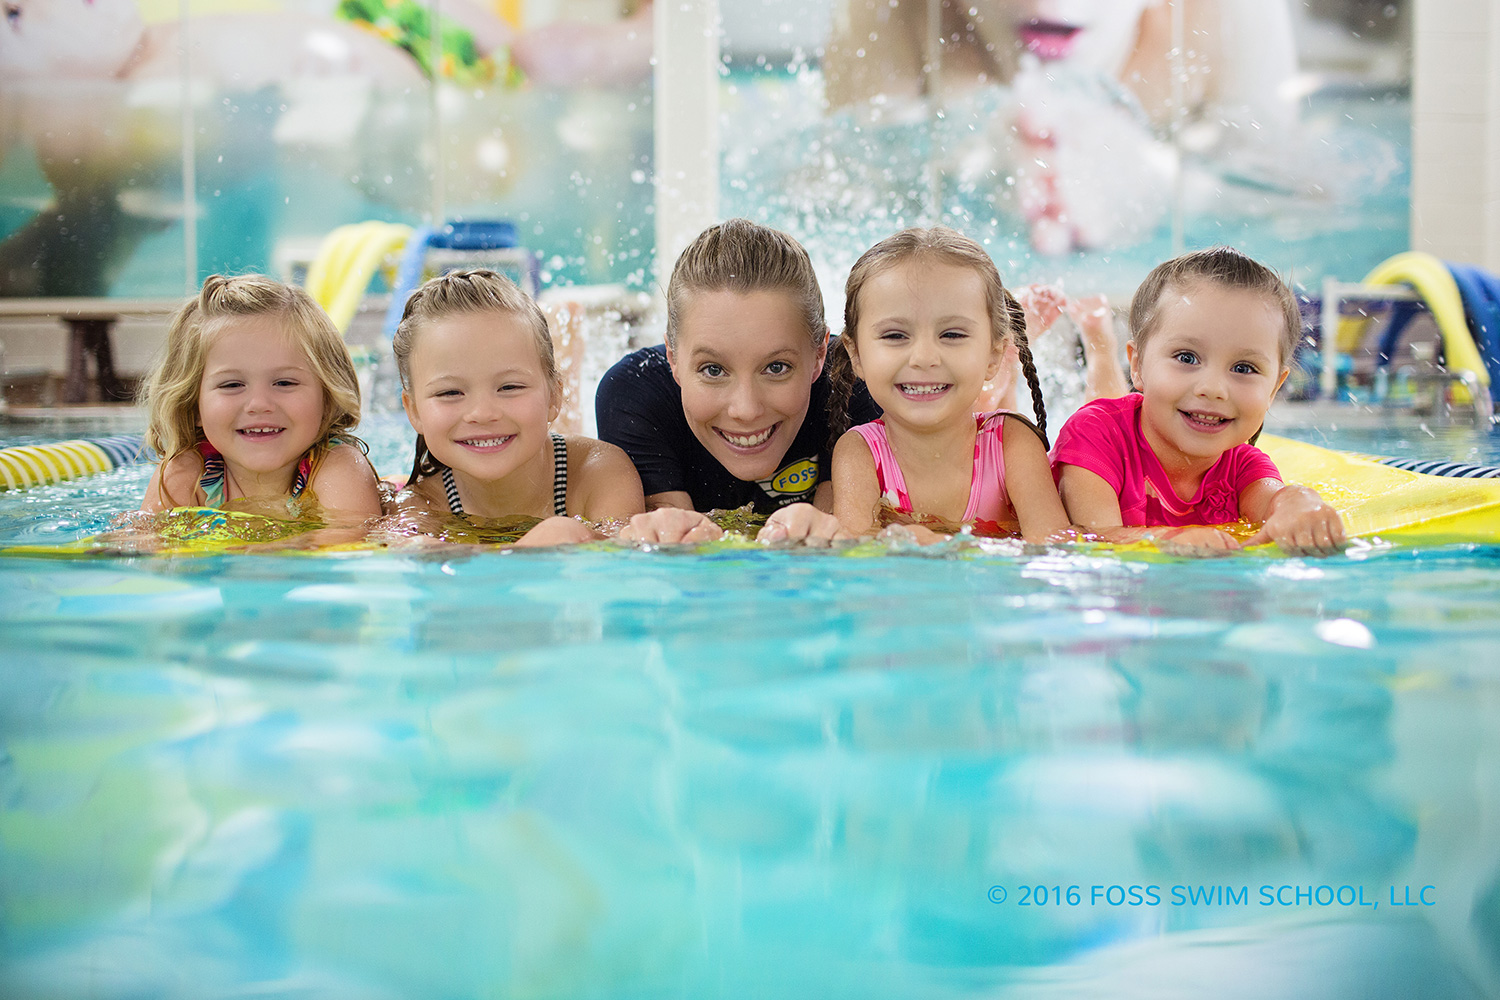 Learn to Swim with the best swim schools for your child